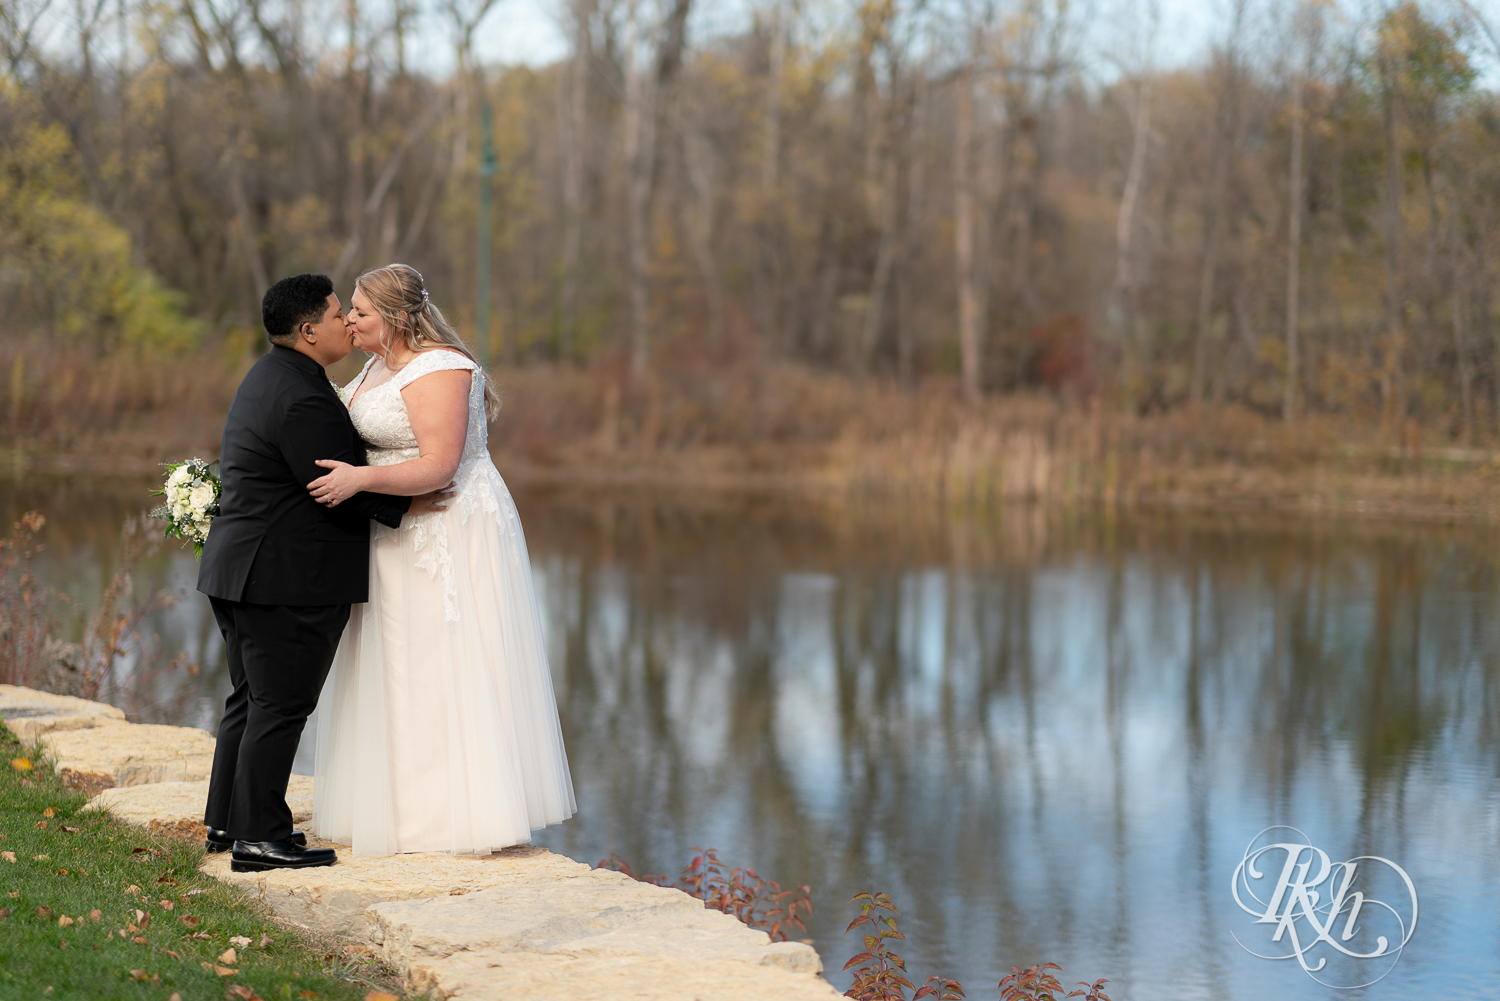 Lesbian brides kiss in fall leaves by pond at the Eagan Community Center in Eagan, Minnesota.